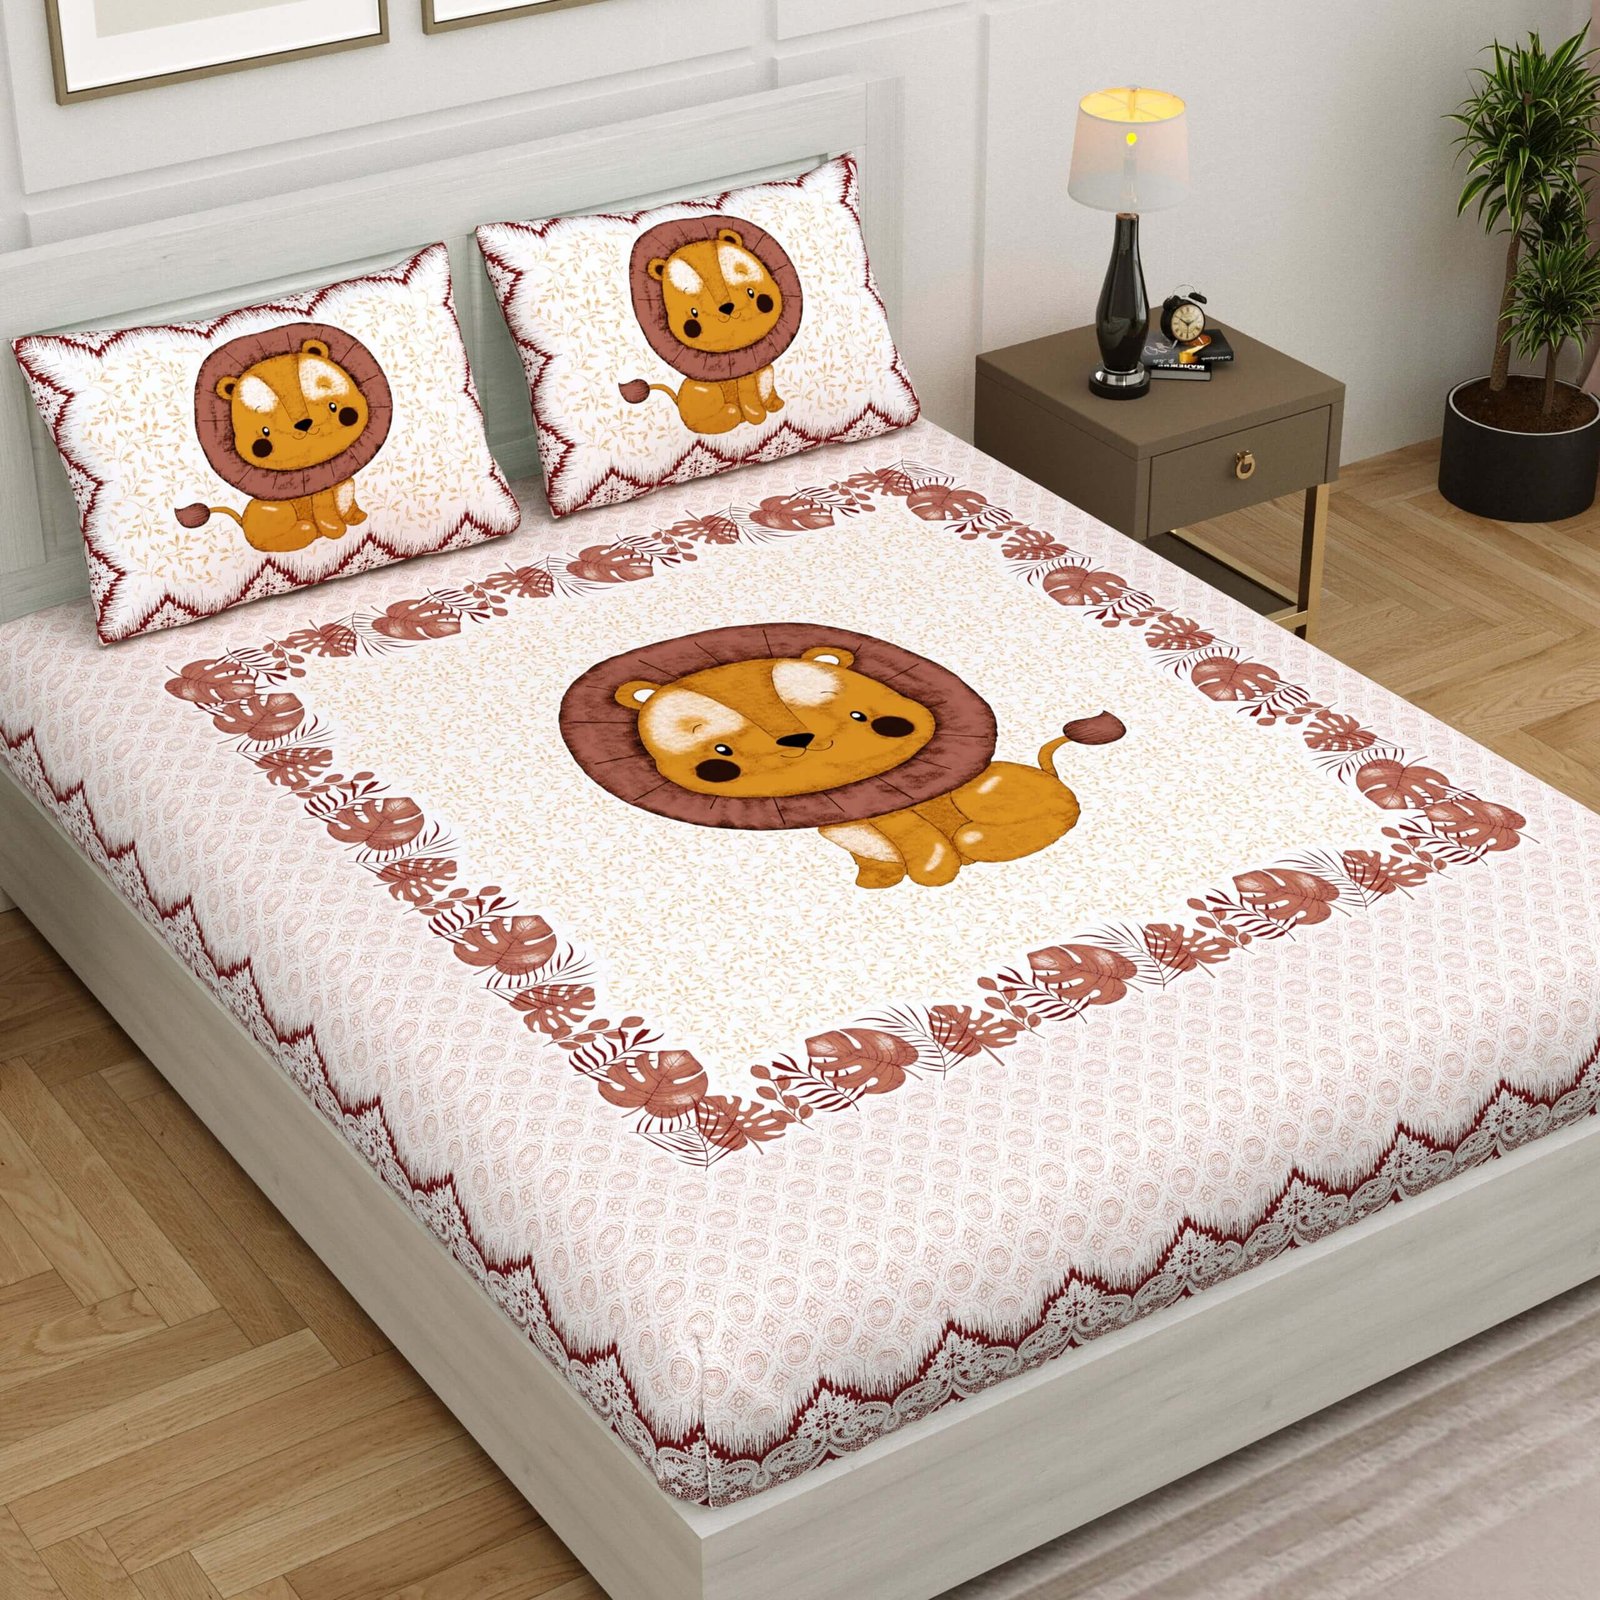 Buy 100 % Pure Cotton Bedsheets For Kids